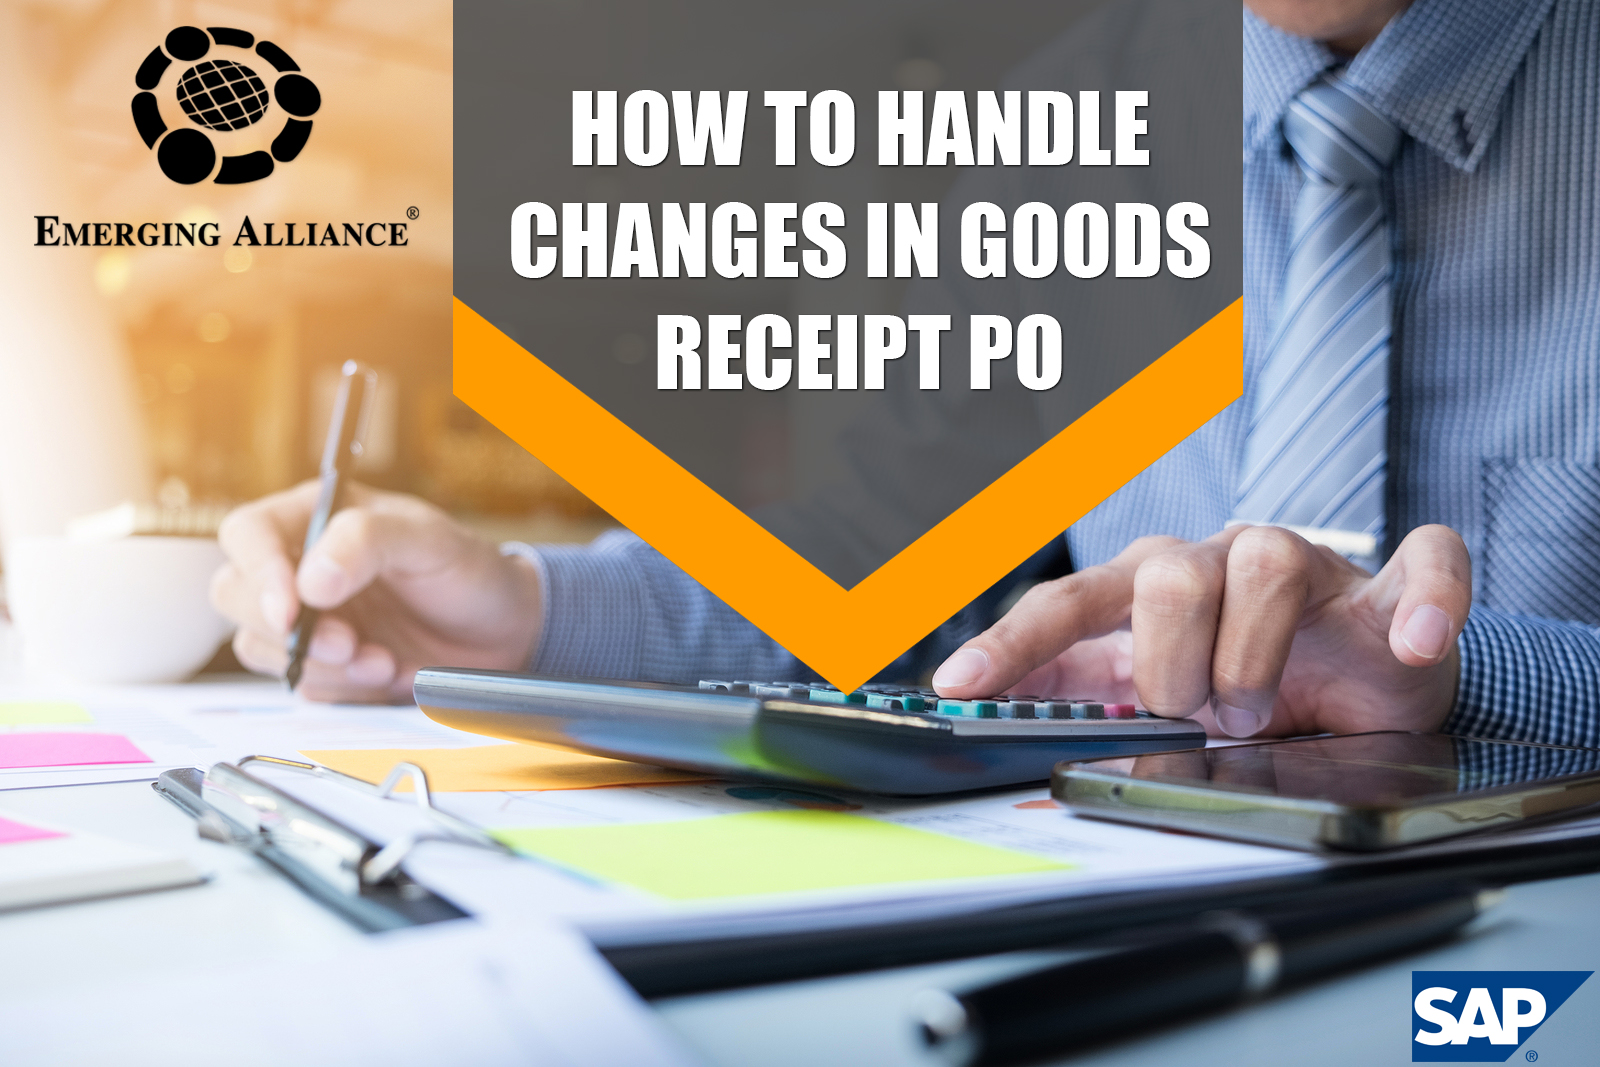 HOW TO HANDLE CHANGES IN GOOD RECEIPT